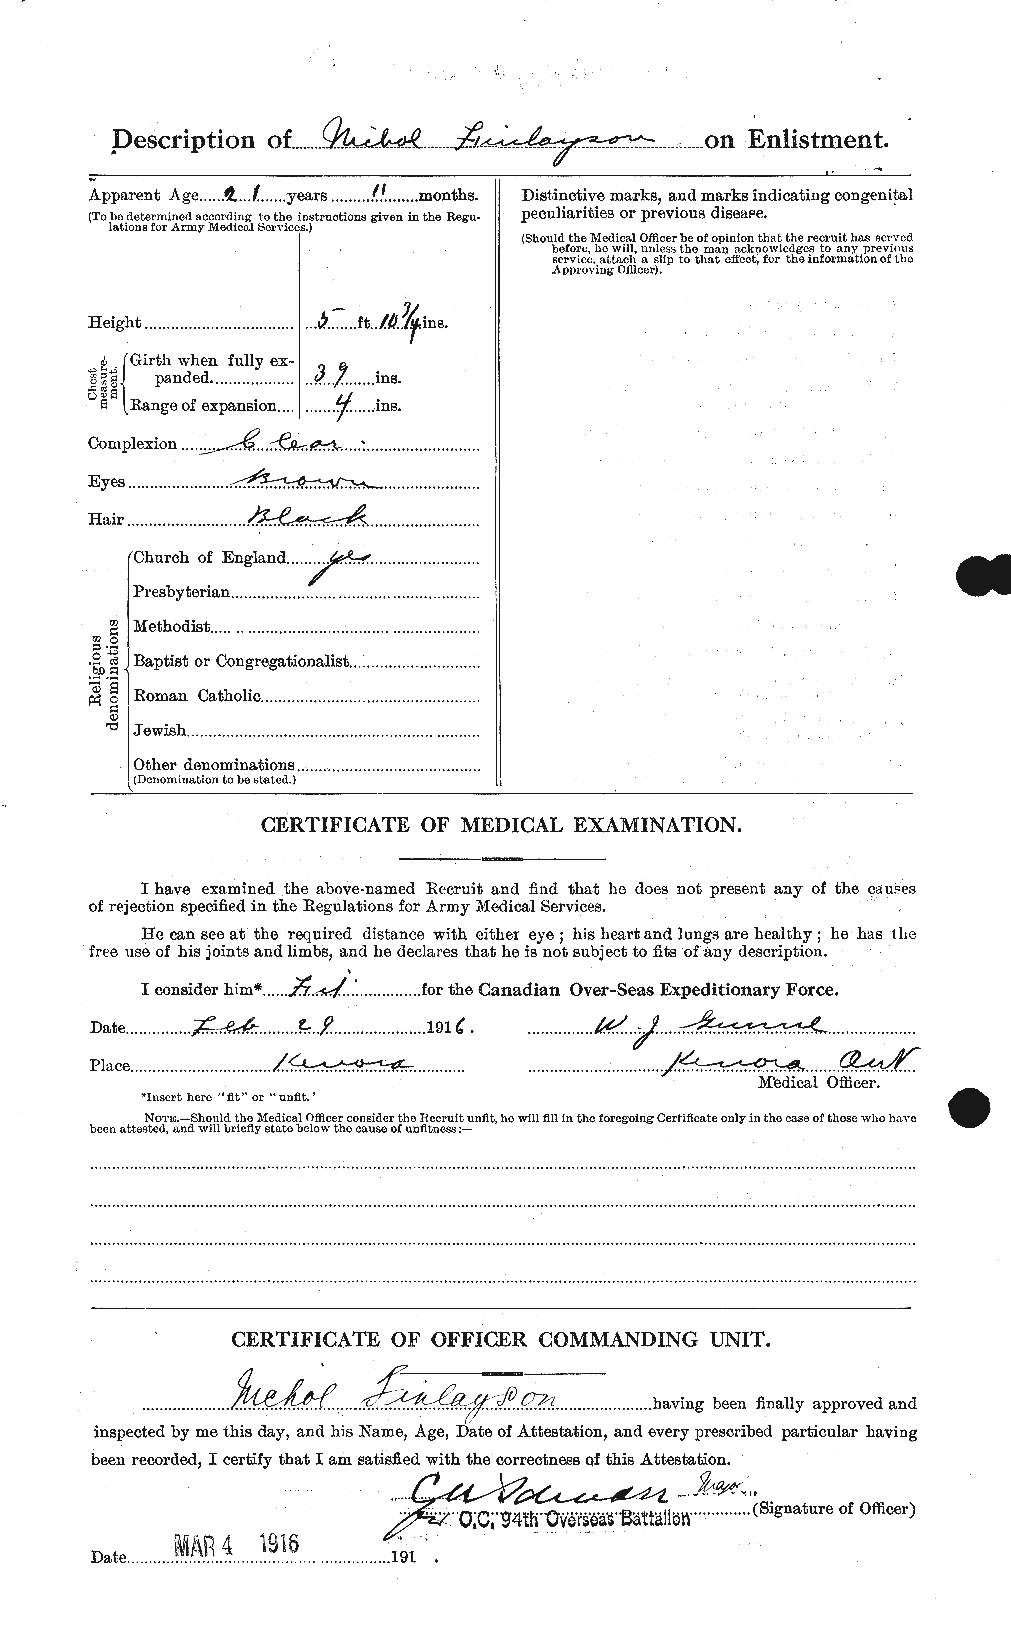 Personnel Records of the First World War - CEF 200298b